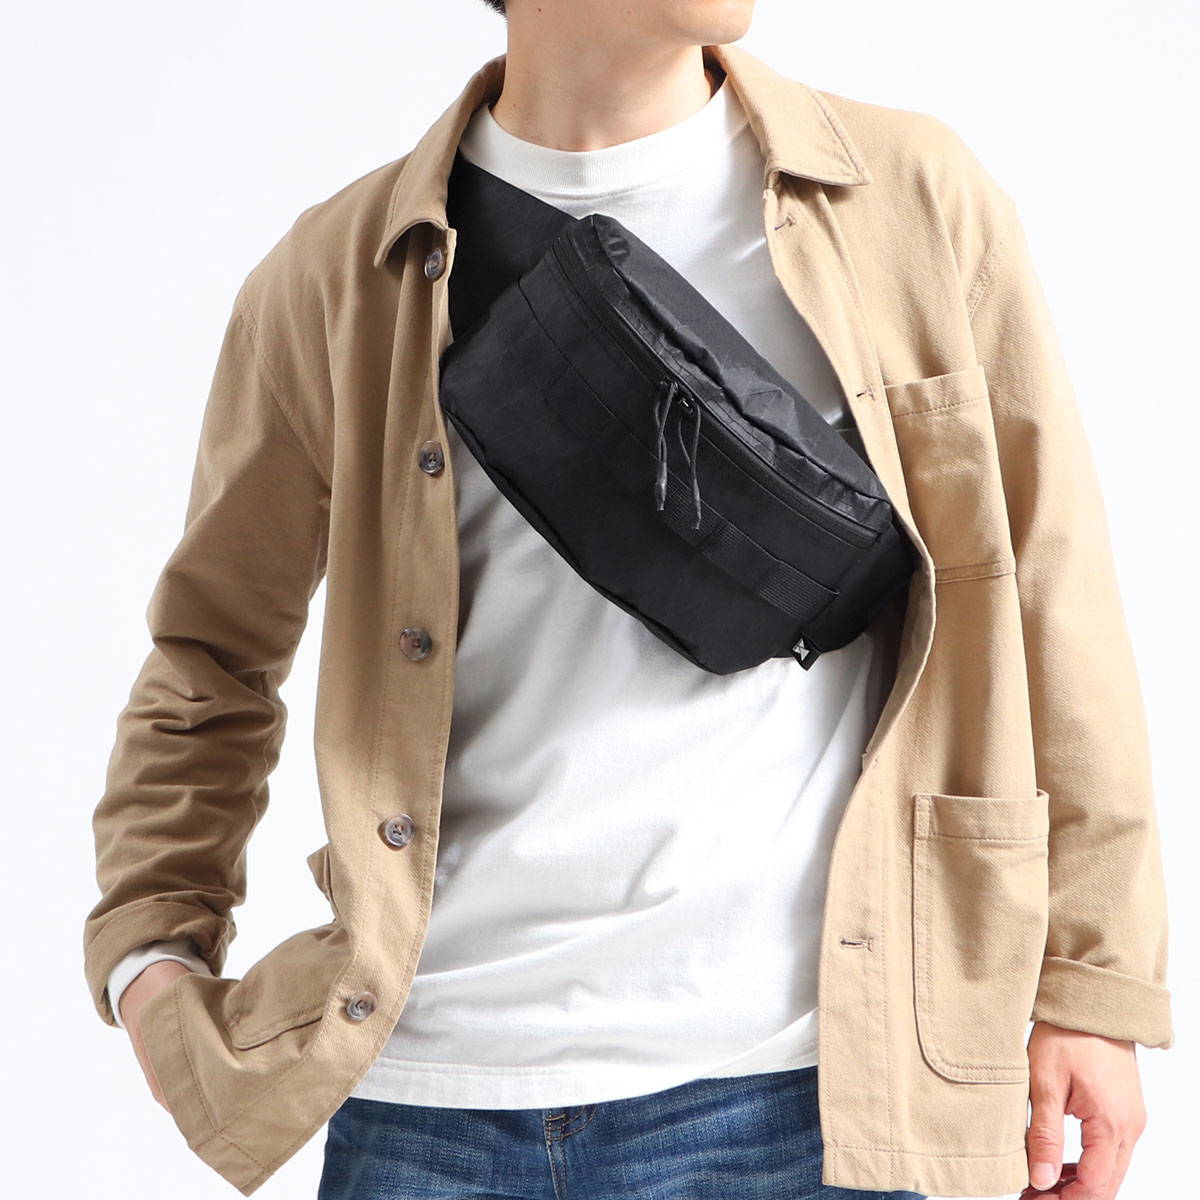 MAKAVELIC マキャベリック RICO SEPARATE WAIST POUCH BAG 3120-10302